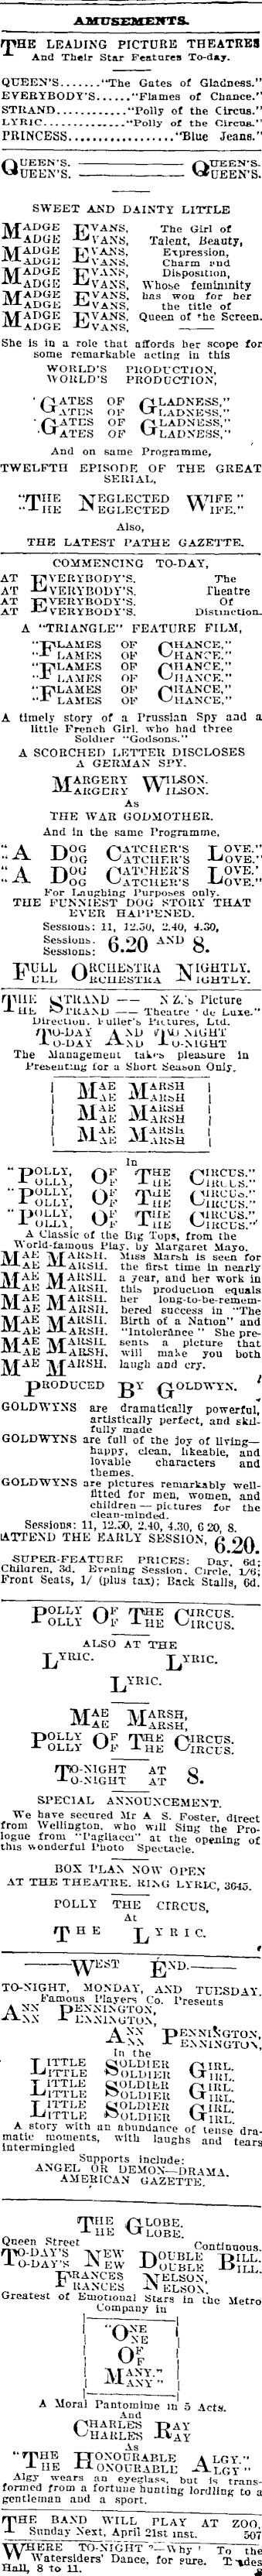 Papers Past Newspapers Auckland Star April 1918 Page 12 Advertisements Column 4